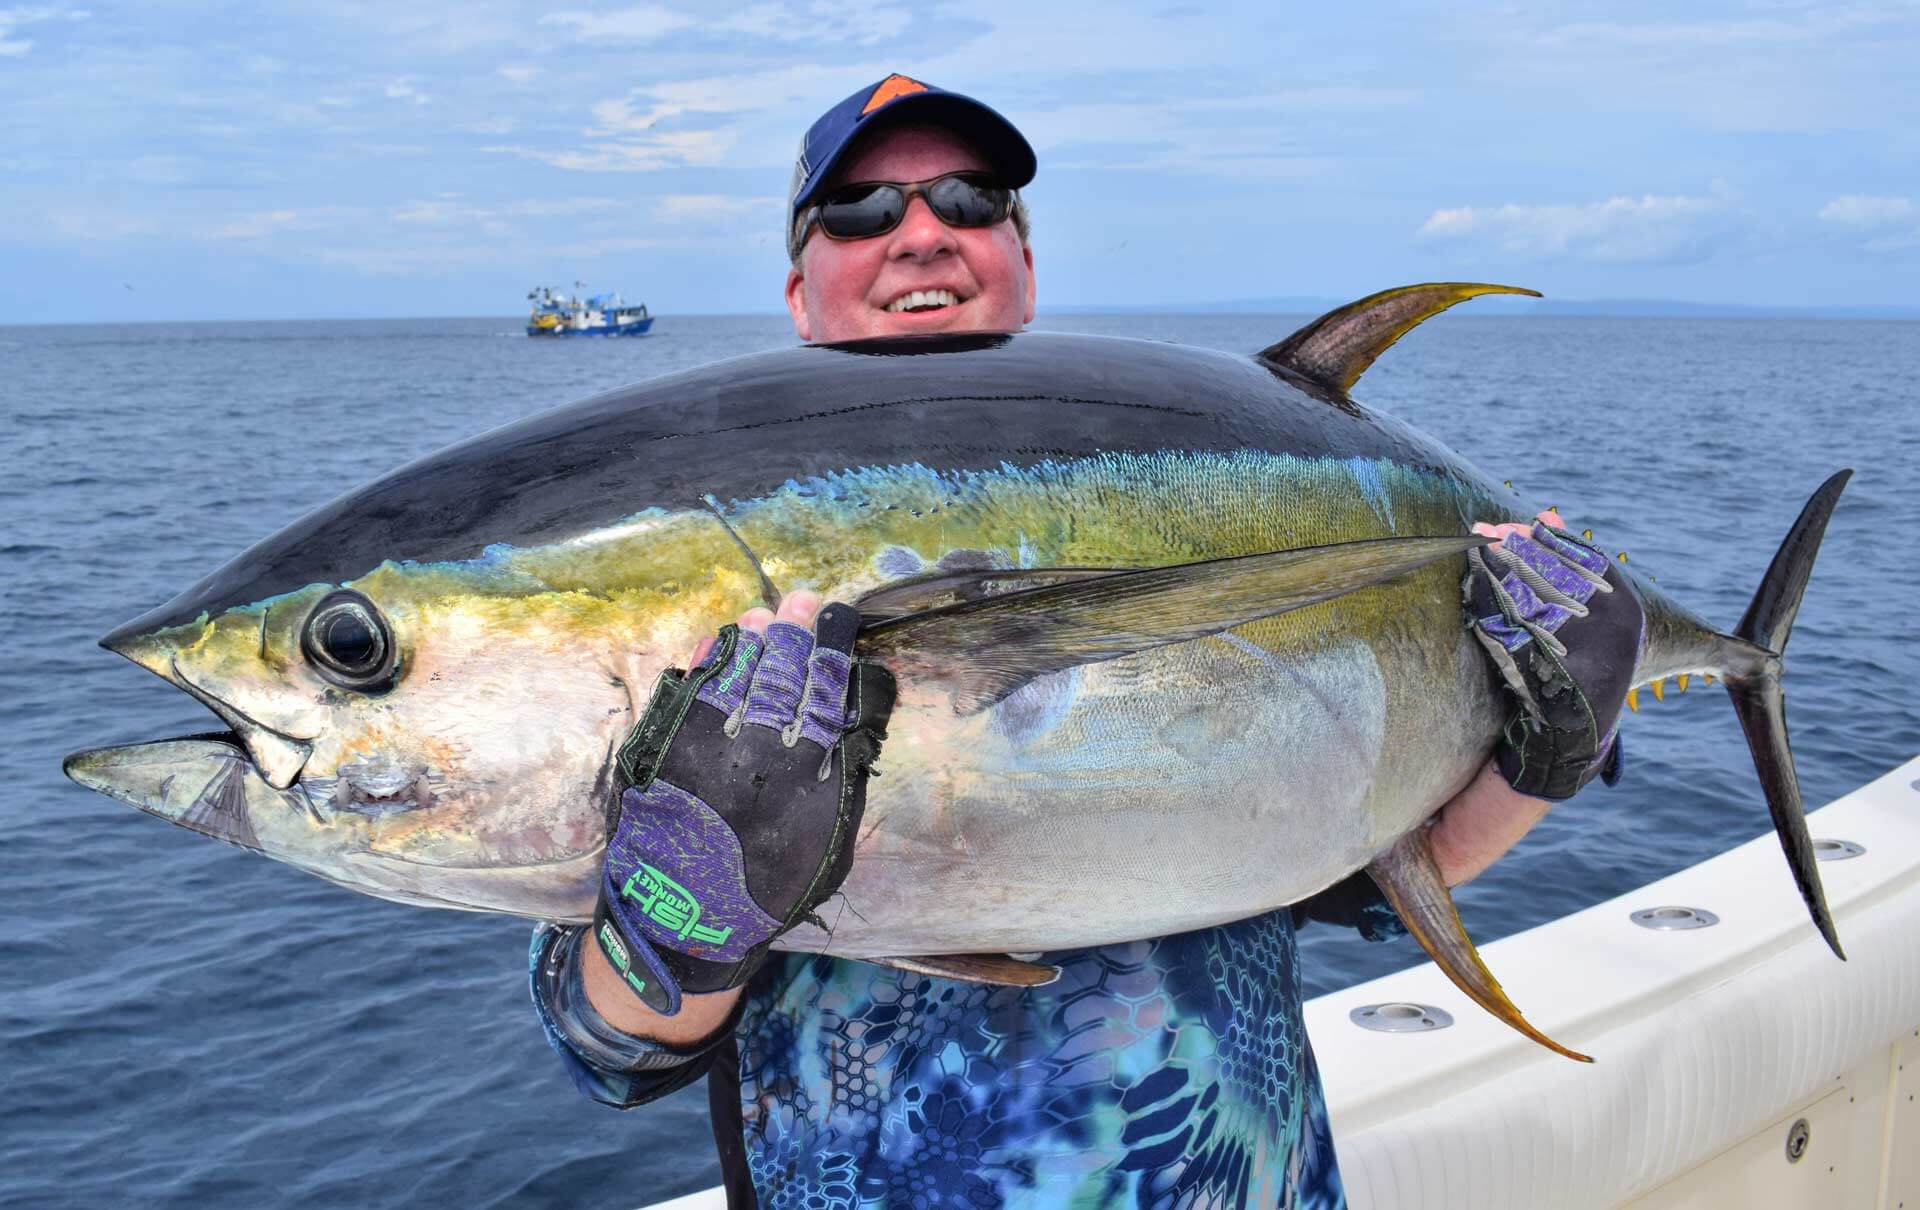 Angler holding large tuna with fishing boat in background